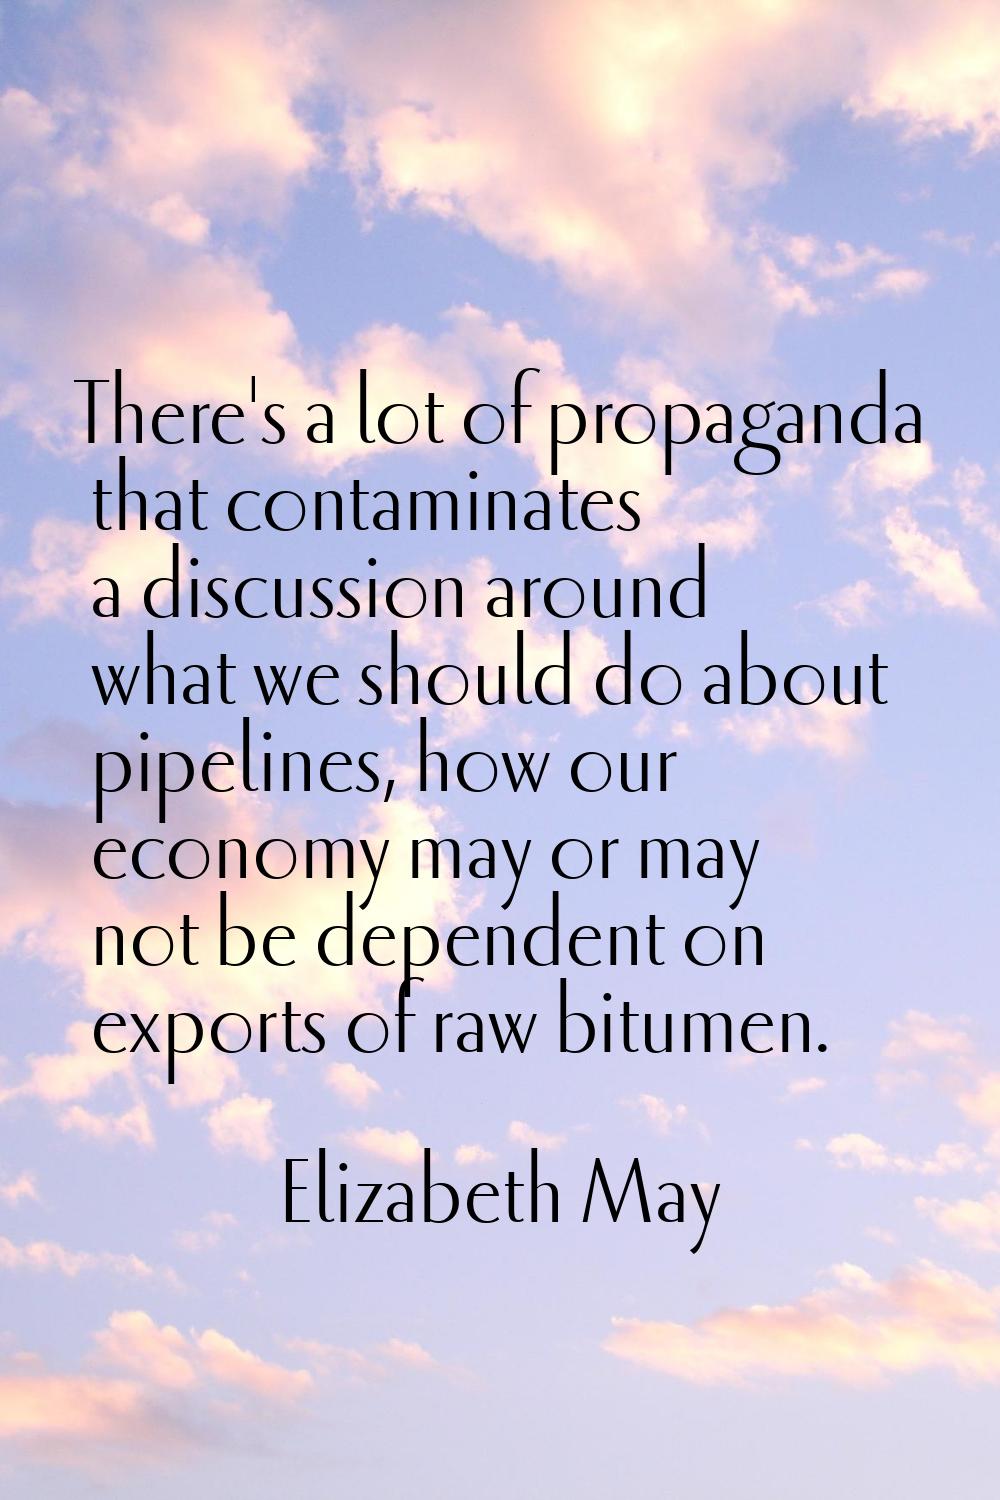 There's a lot of propaganda that contaminates a discussion around what we should do about pipelines